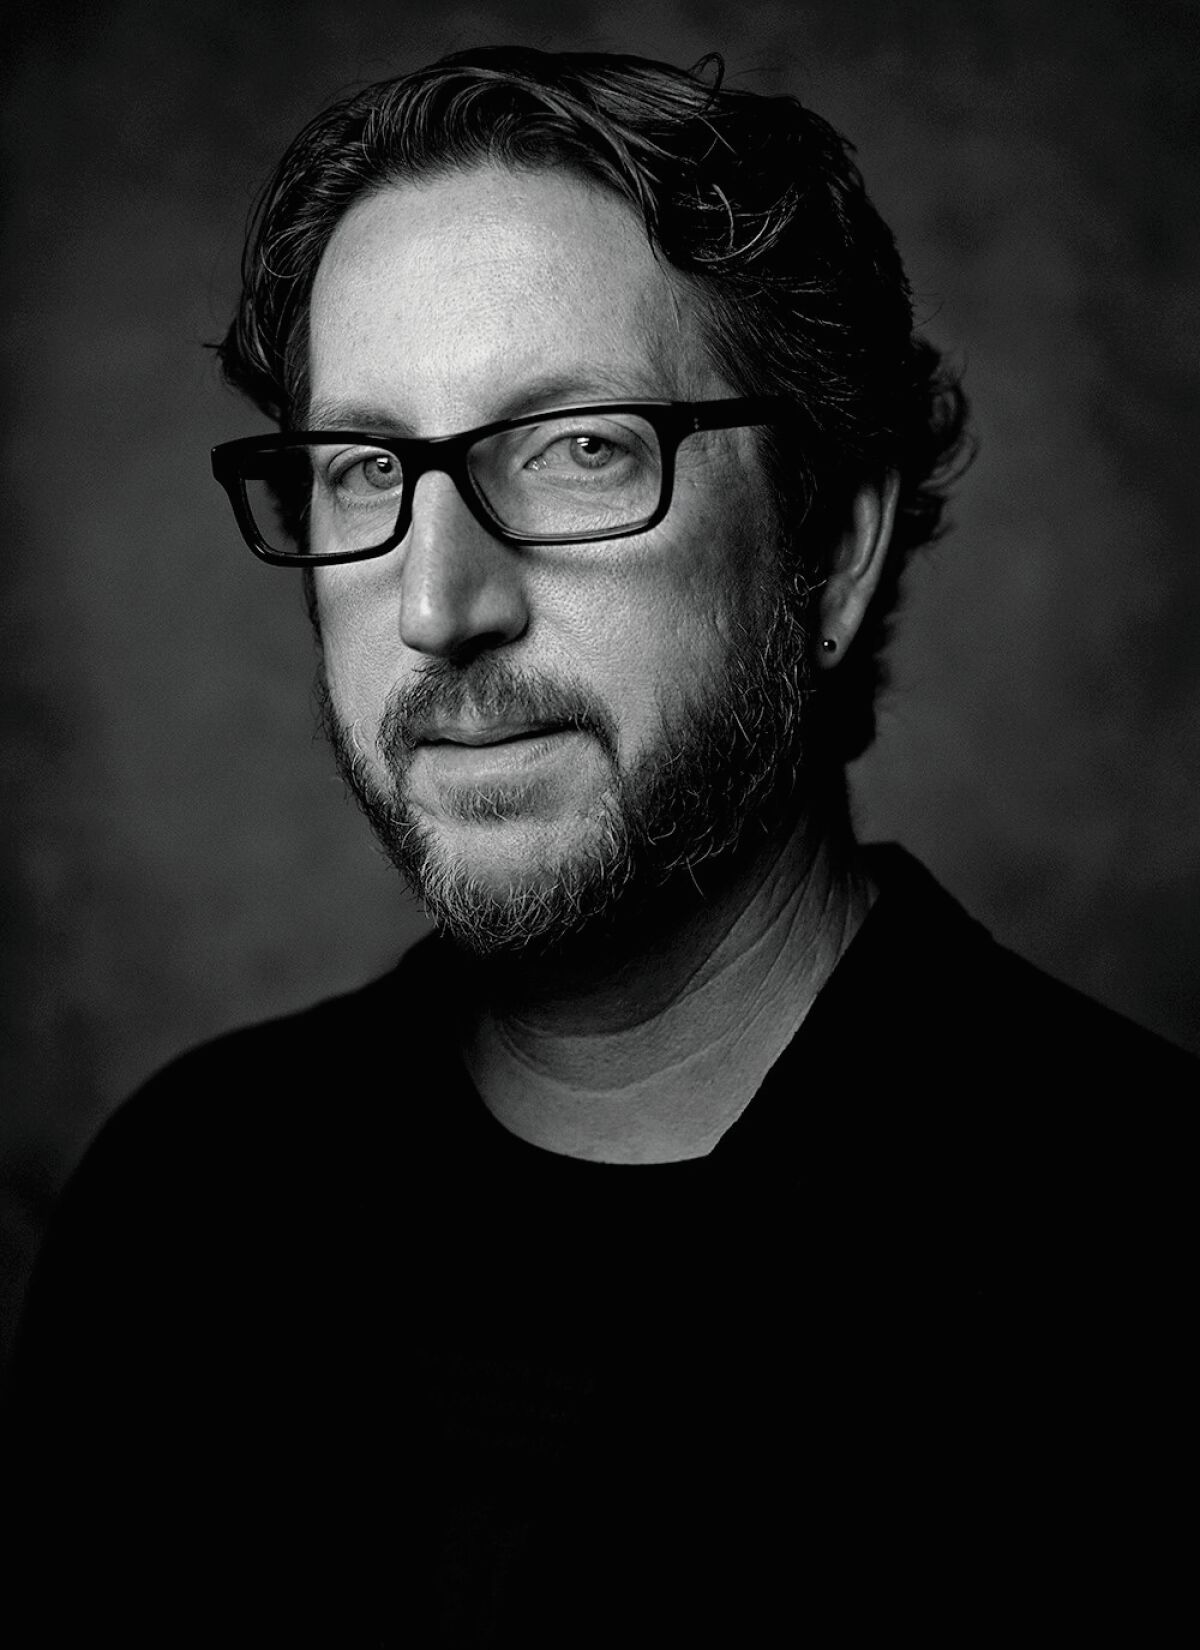 A black-and-white portrait of a man with glasses